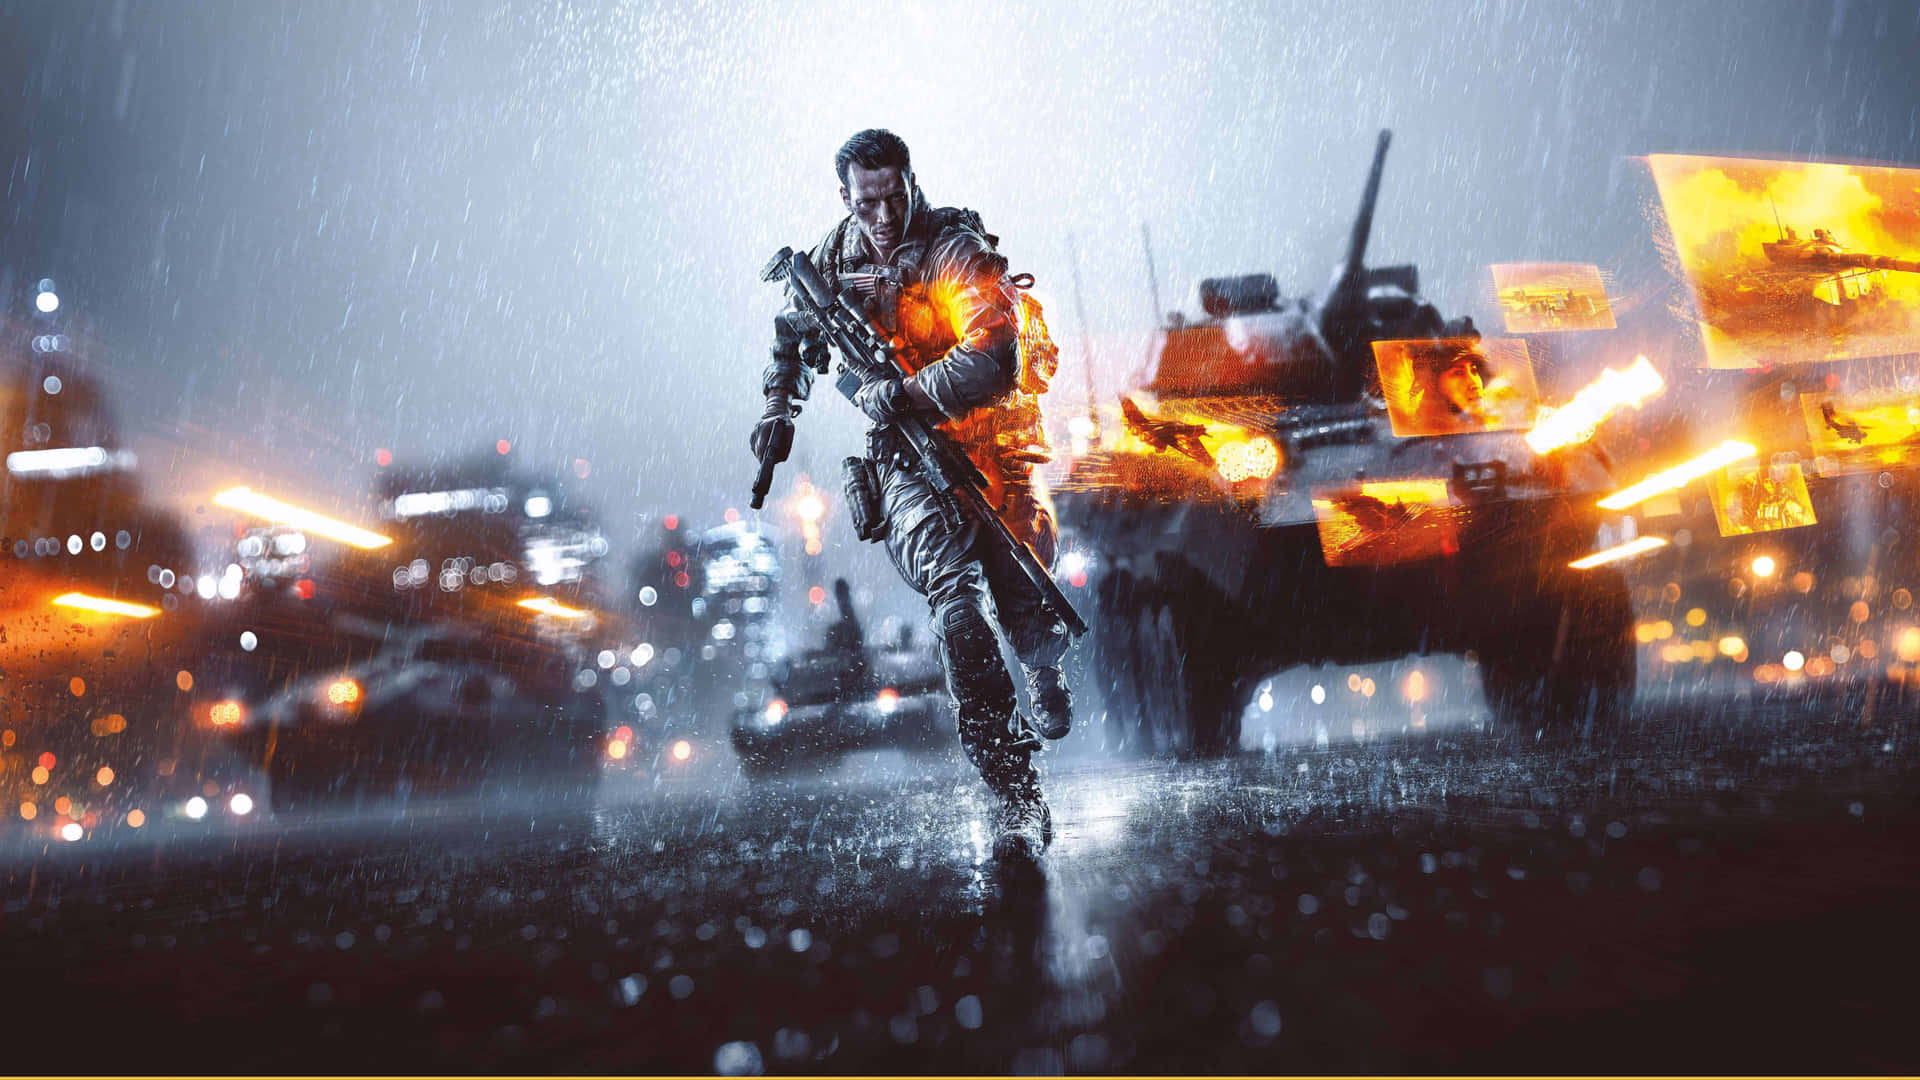 "High-Definition Graphics and Incredible Action Make Battlefield 4k the Best Shooter Experience" Wallpaper